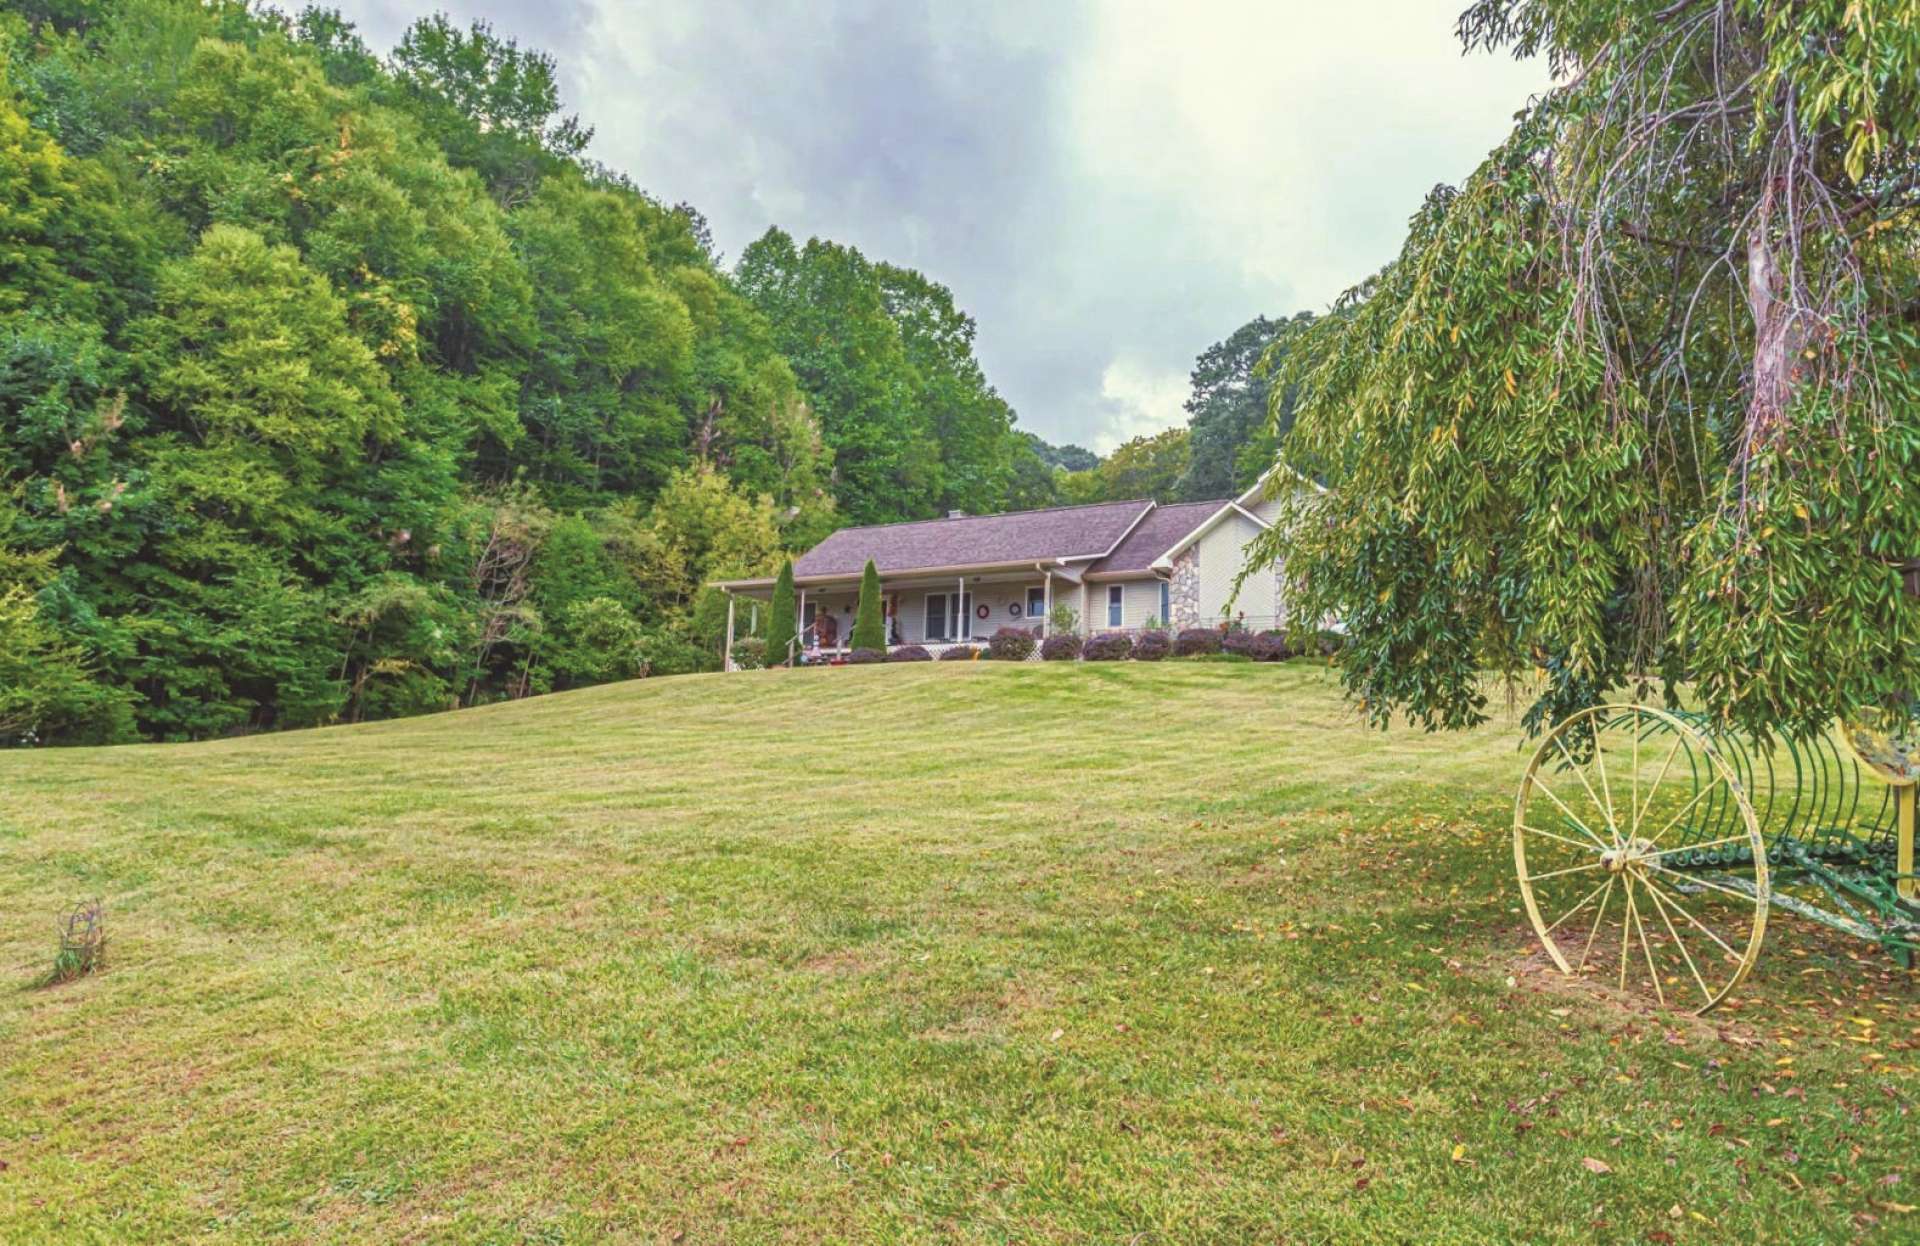 Farm Living at its finest! 45.75 acres of pastures and woodlands, a 3-bedroom, 2-bath custom built home, barn, RV/camper hookup with septic and water, pond, countryside views, and a location that is convenient to West Jefferson, Damascus, and Mountain City, Offered at $399,000. D177